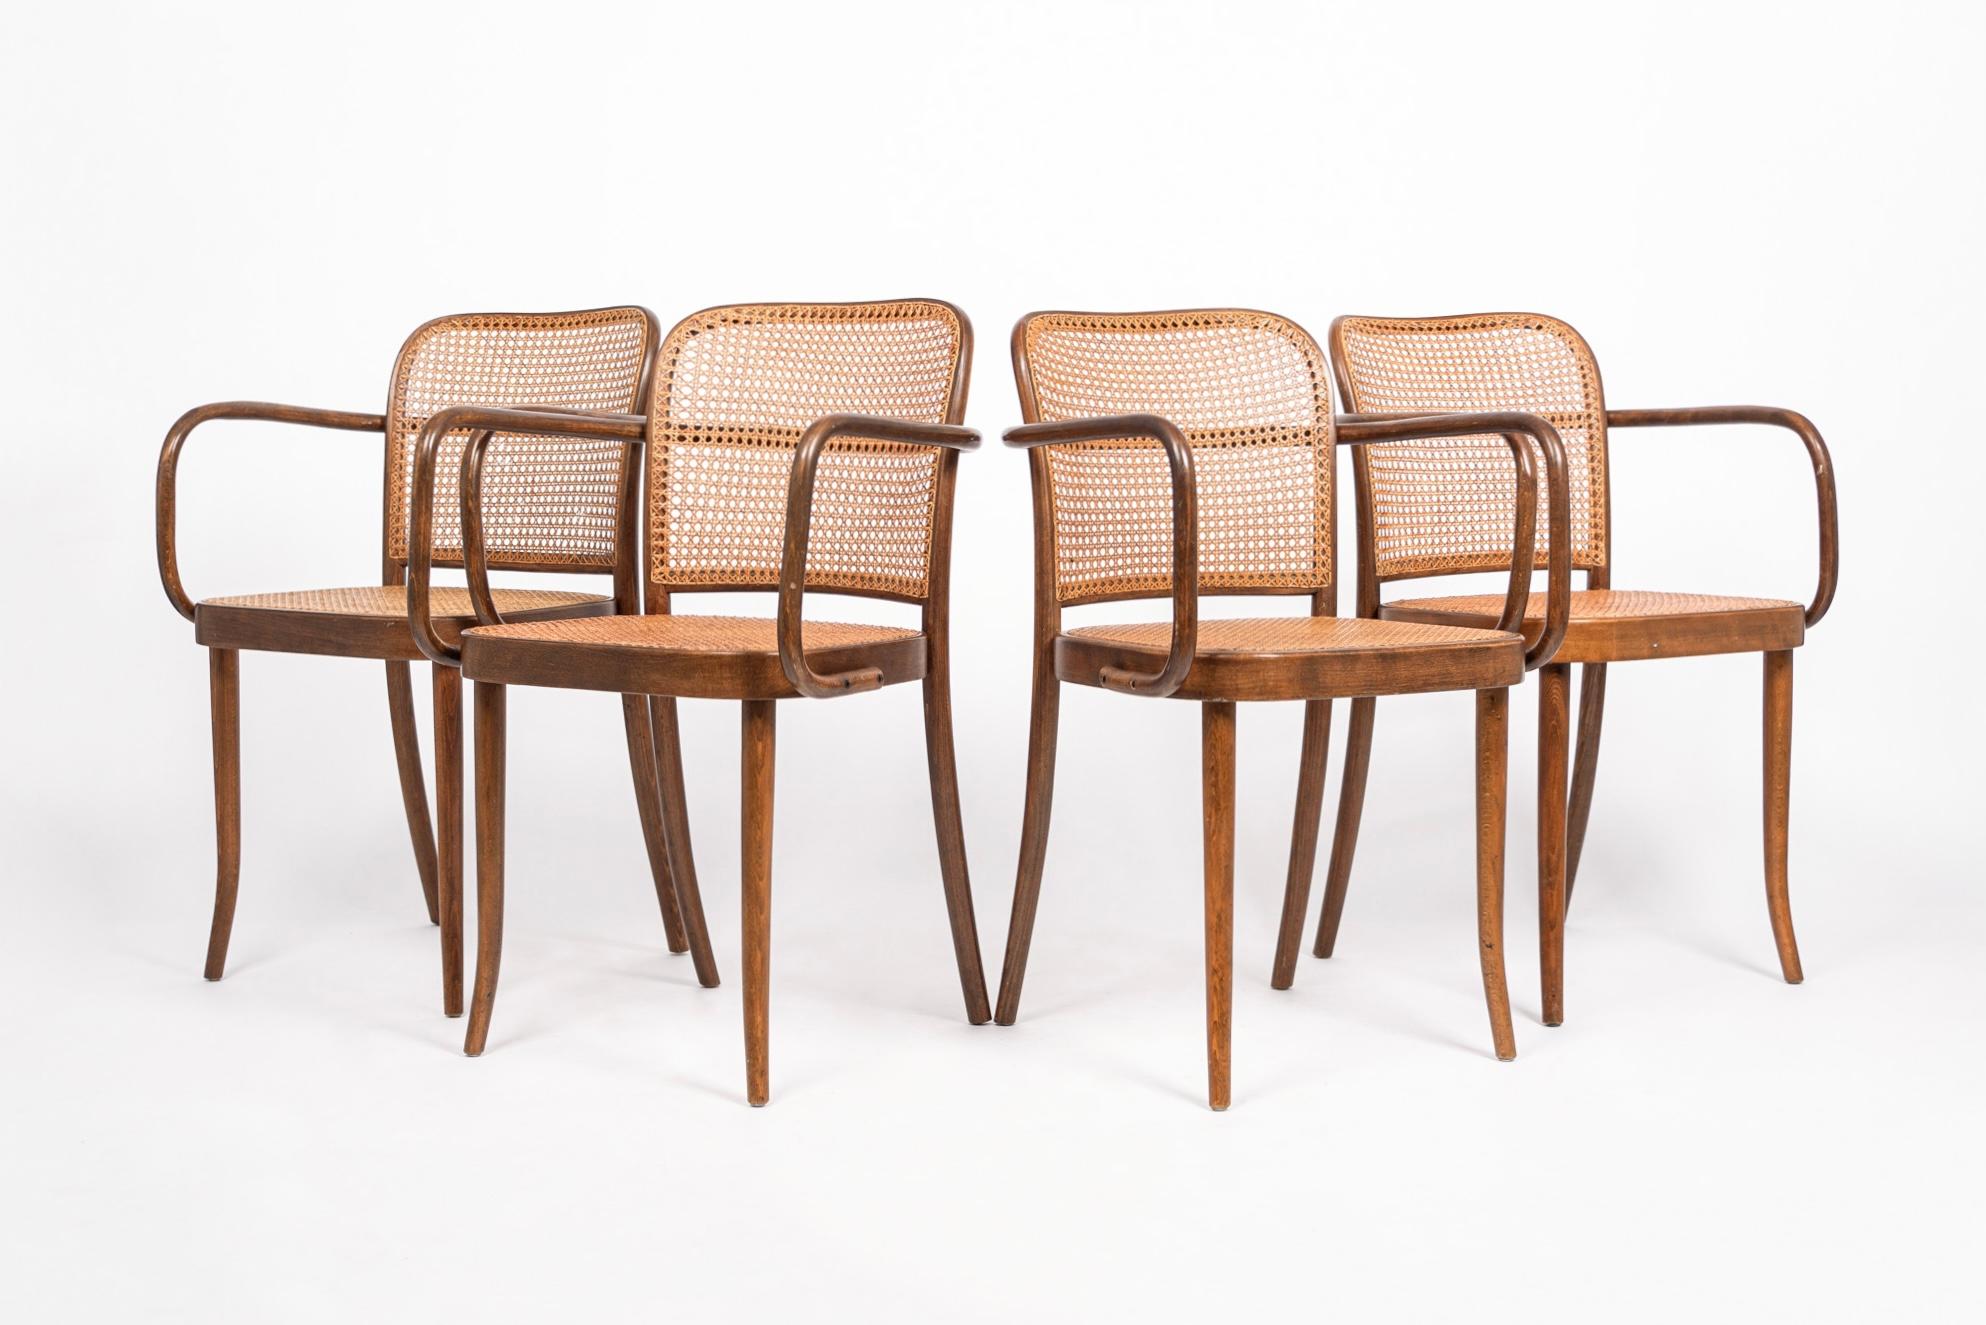 This set of four vintage mid century Bentwood Prague Model 811 cafe dining chair were originally designed by Austrian architects Josef Hoffman & Josef Frank for Thonet in the 1920s. These chairs were made in Czechoslovakia by Stendig circa 1960. The